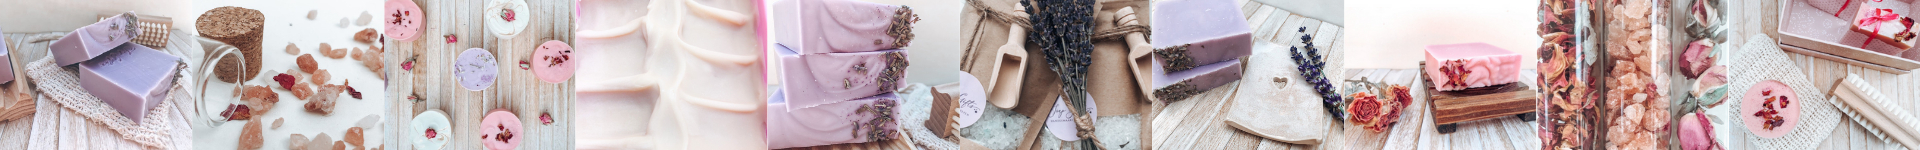 SoapGifts By Elines achtergrond